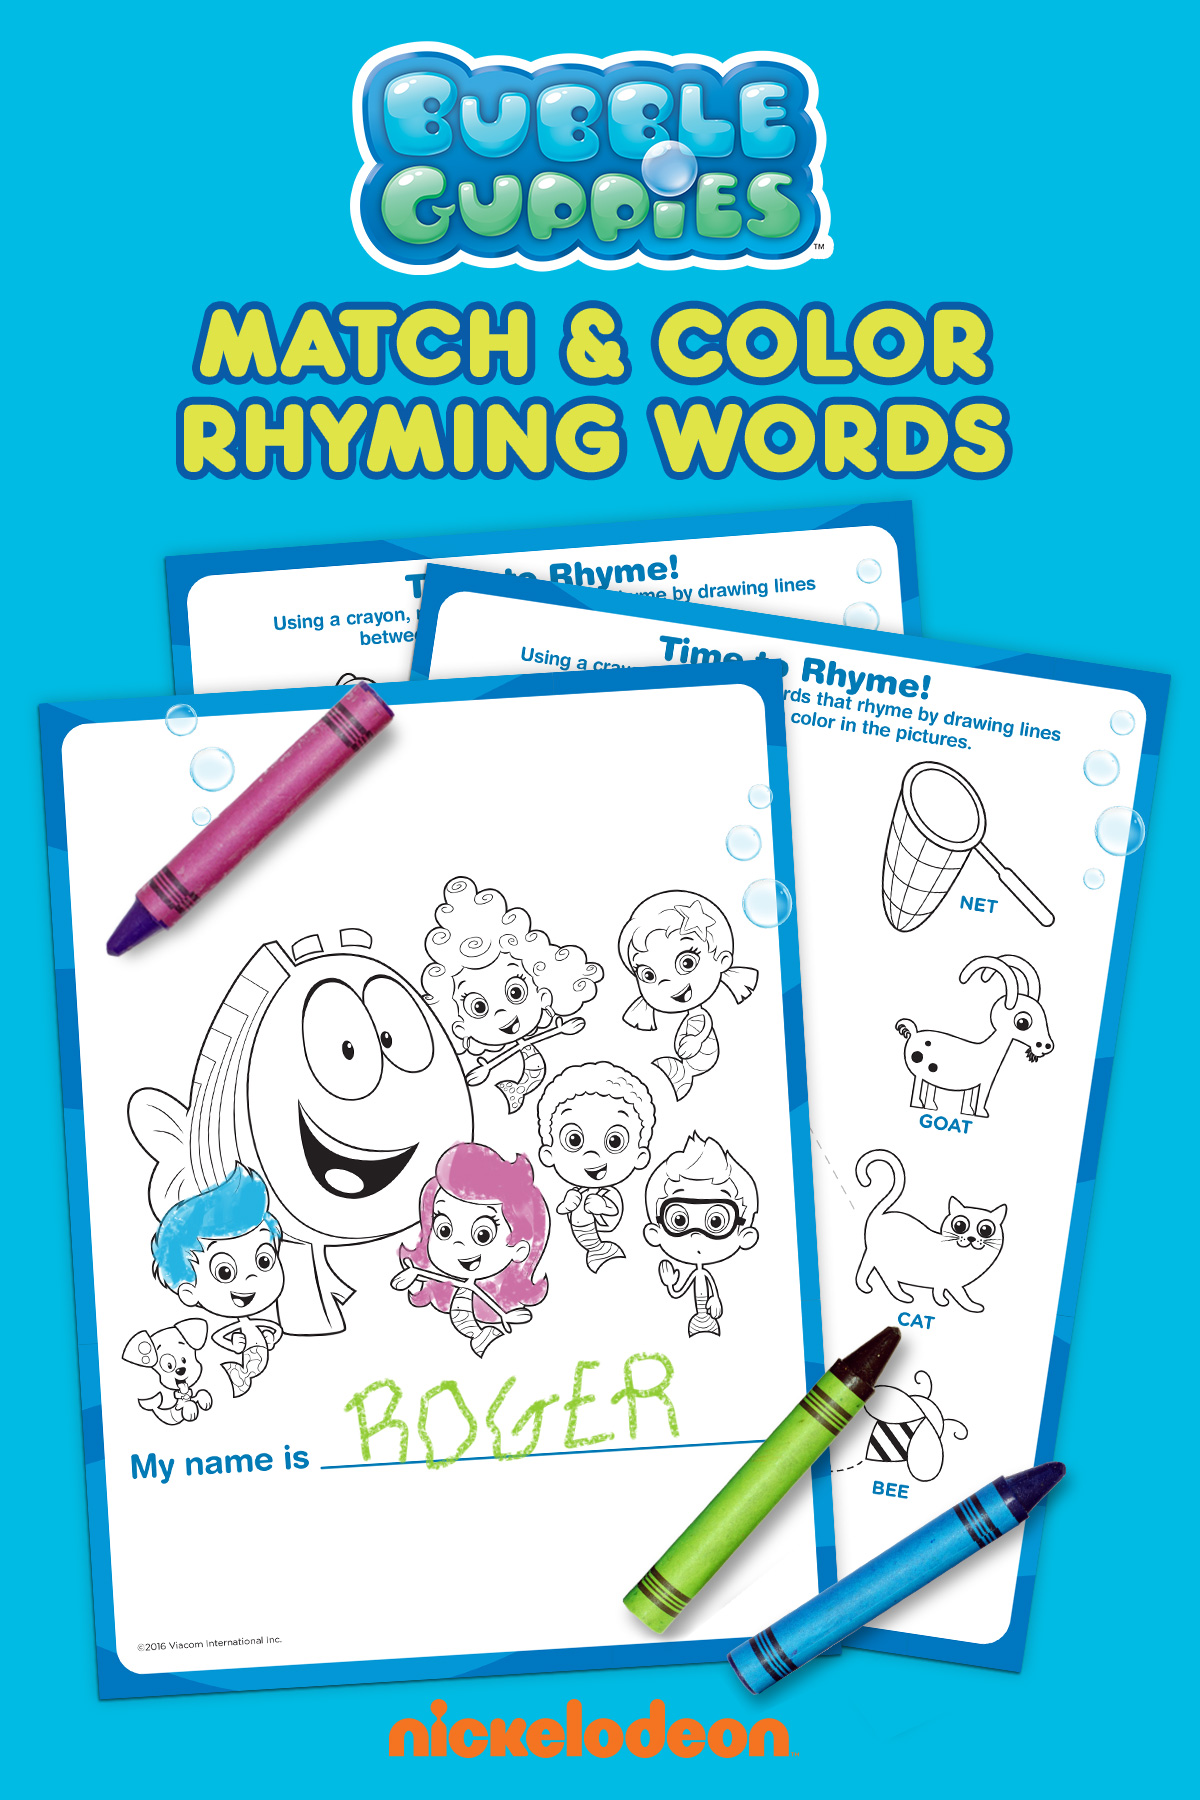 Bubble Guppies Match & Color Rhyming Words